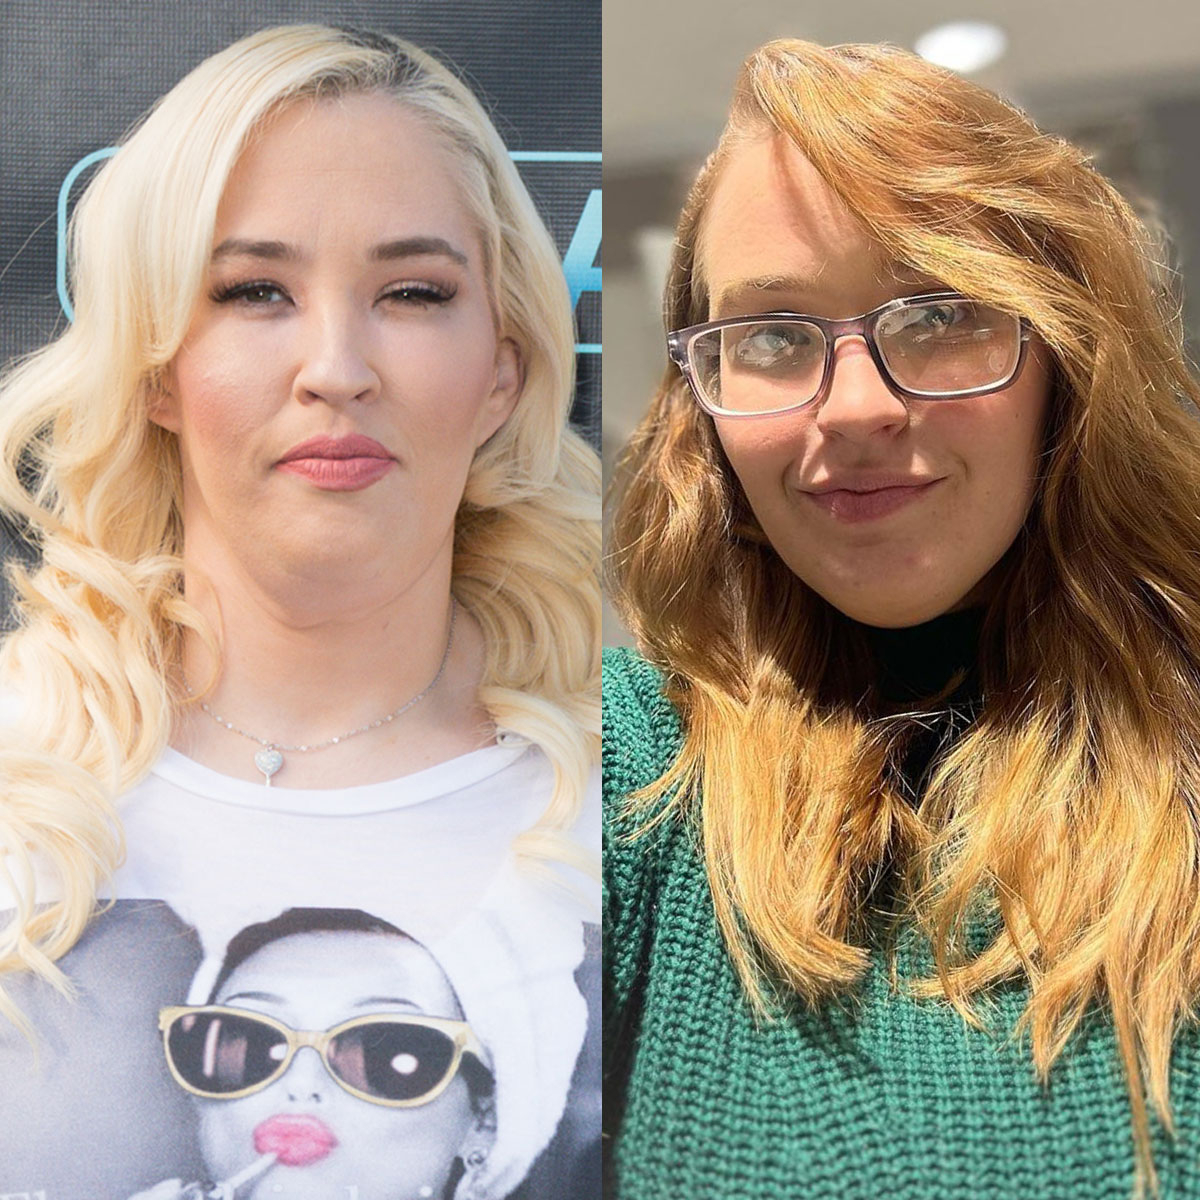 Mama June Shannon Gets Temporary Custody of Anna Cardwell’s Daughter